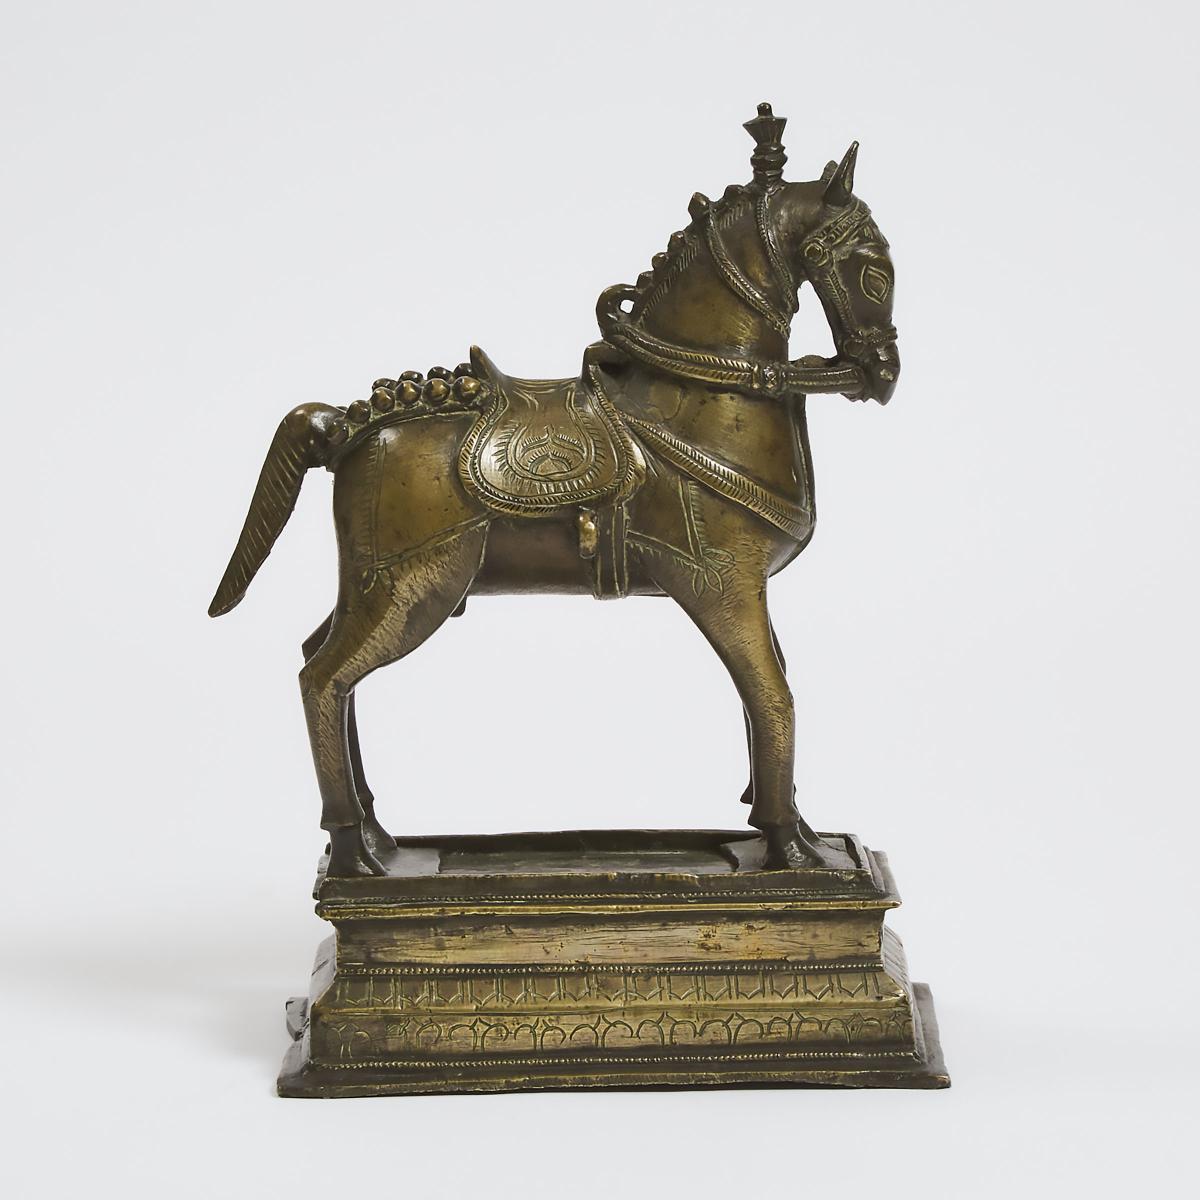 Indian Gilt Brass Model of Khandoba's Horse, 18th or 19th century, 12.25 x 9.25 in — 31.1 x 23.5 cm - Image 3 of 4